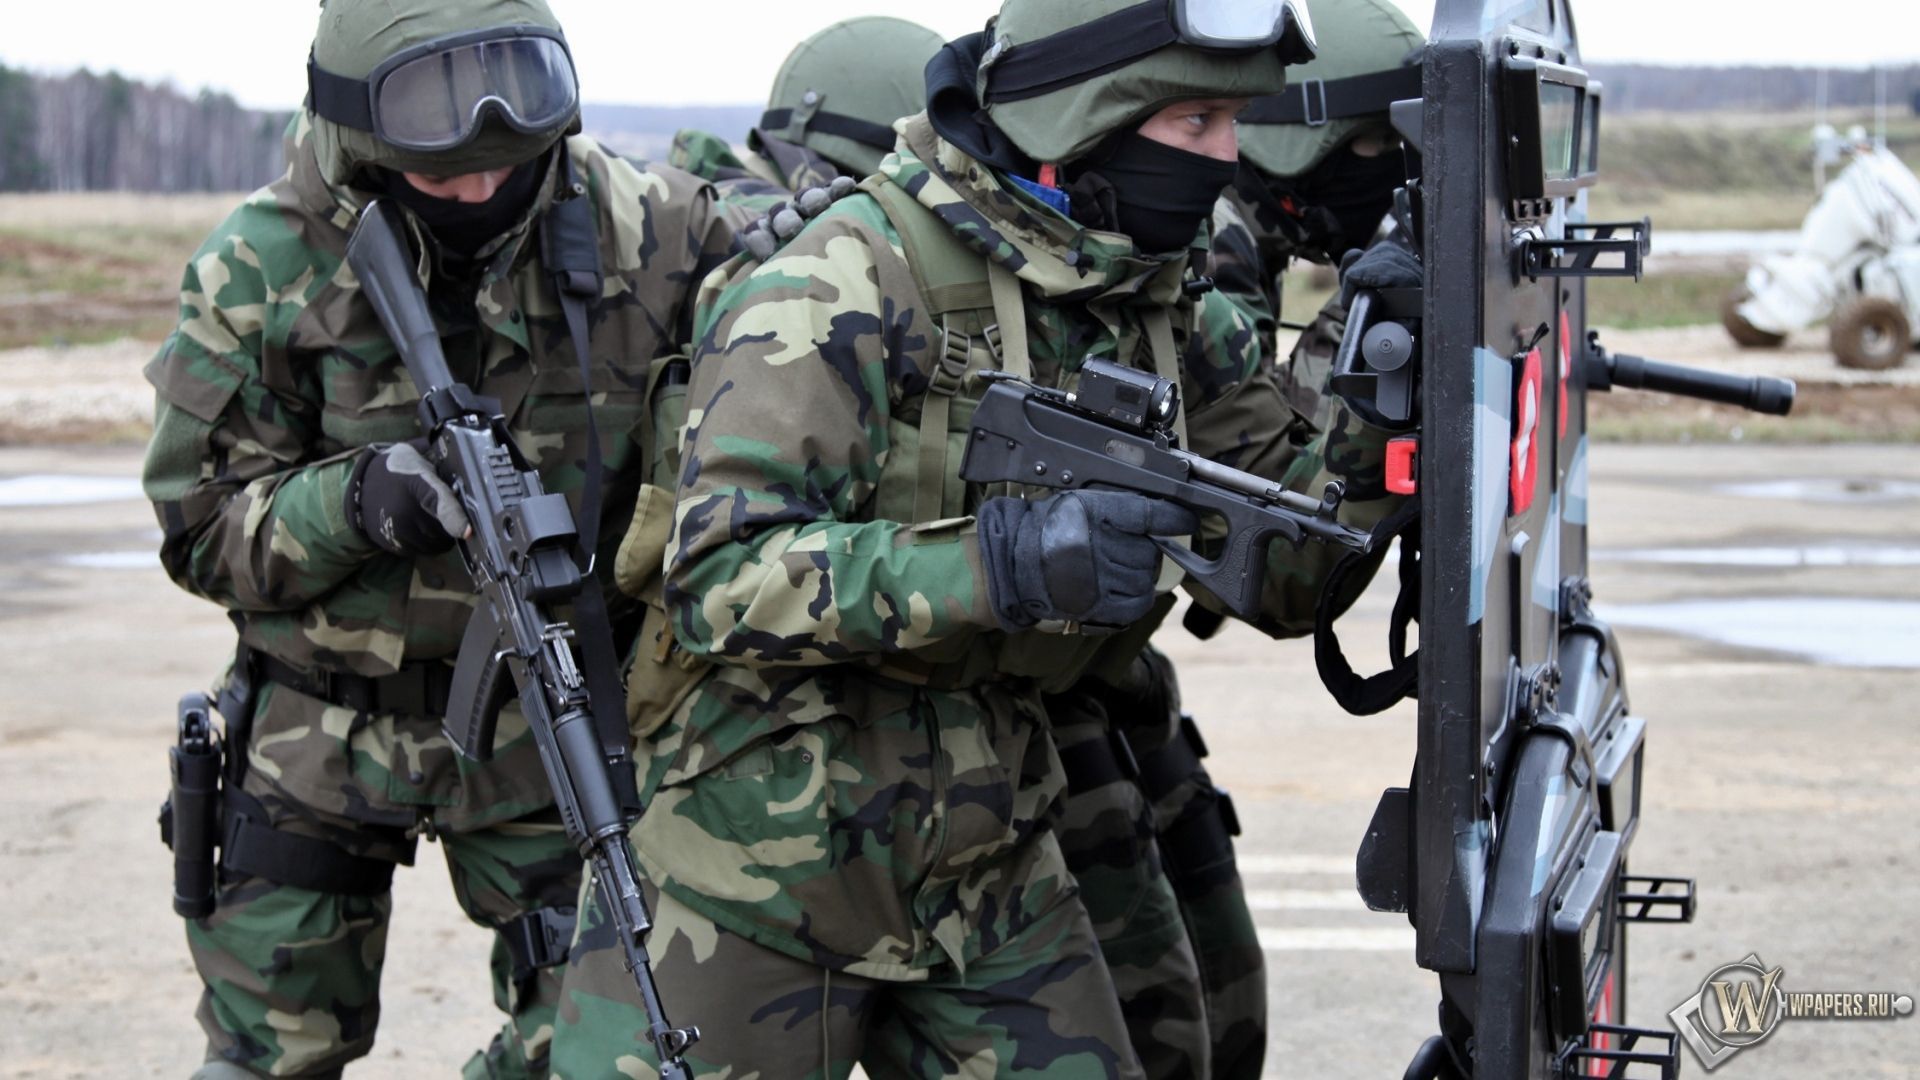 Russian special forces wallpapers and images - wallpapers ...